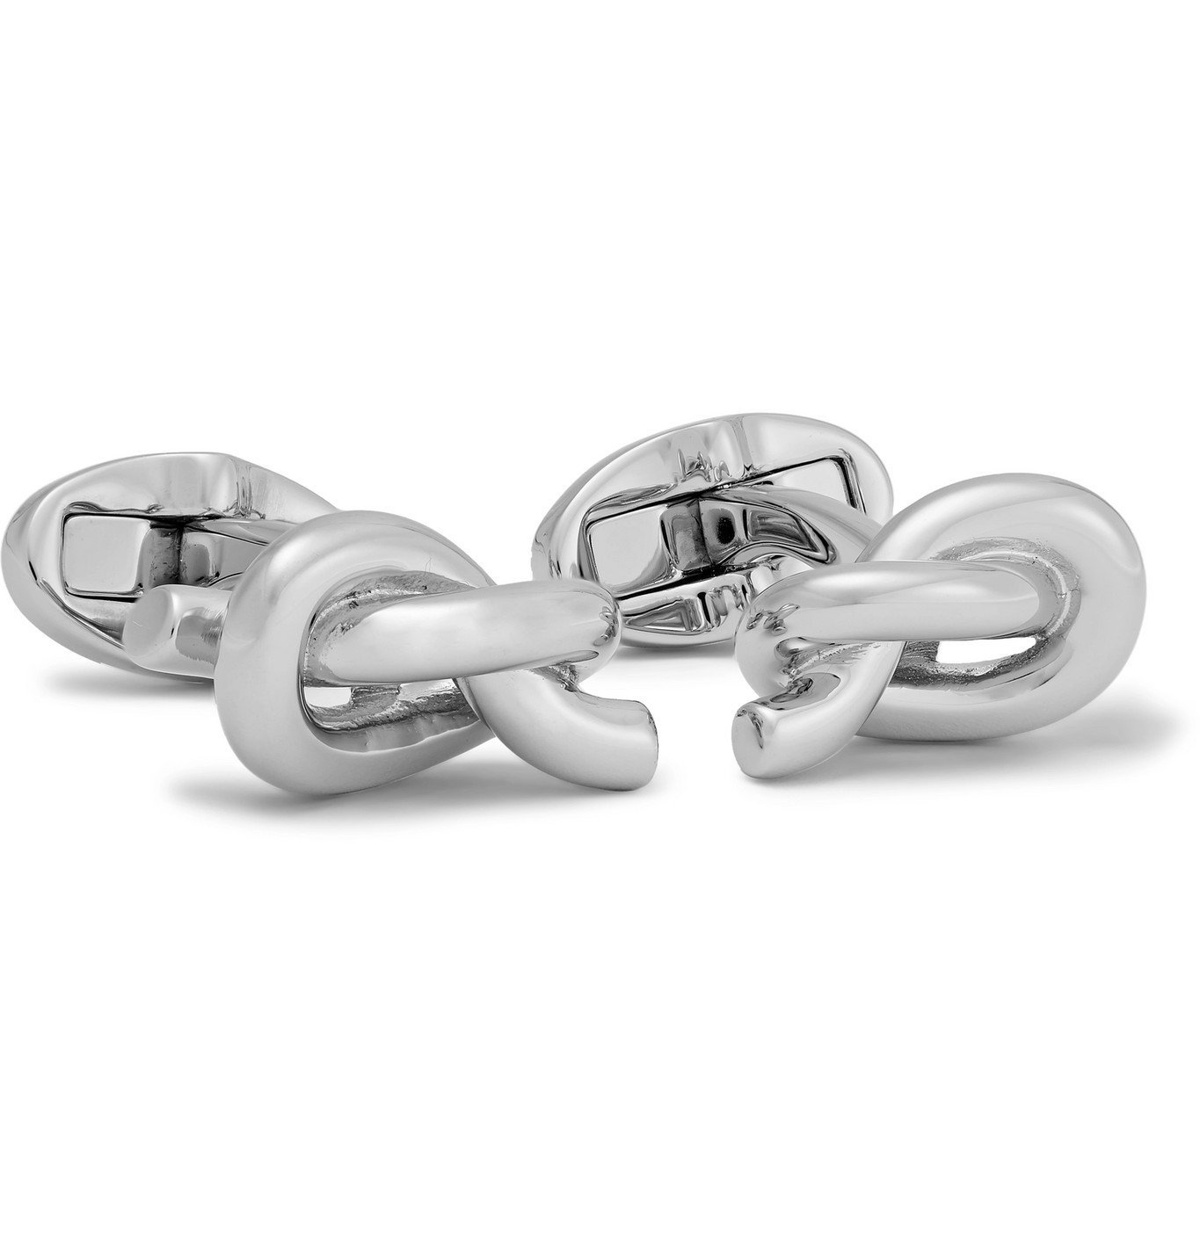 Mulberry Oval Reversible Cufflinks in Silver Plated